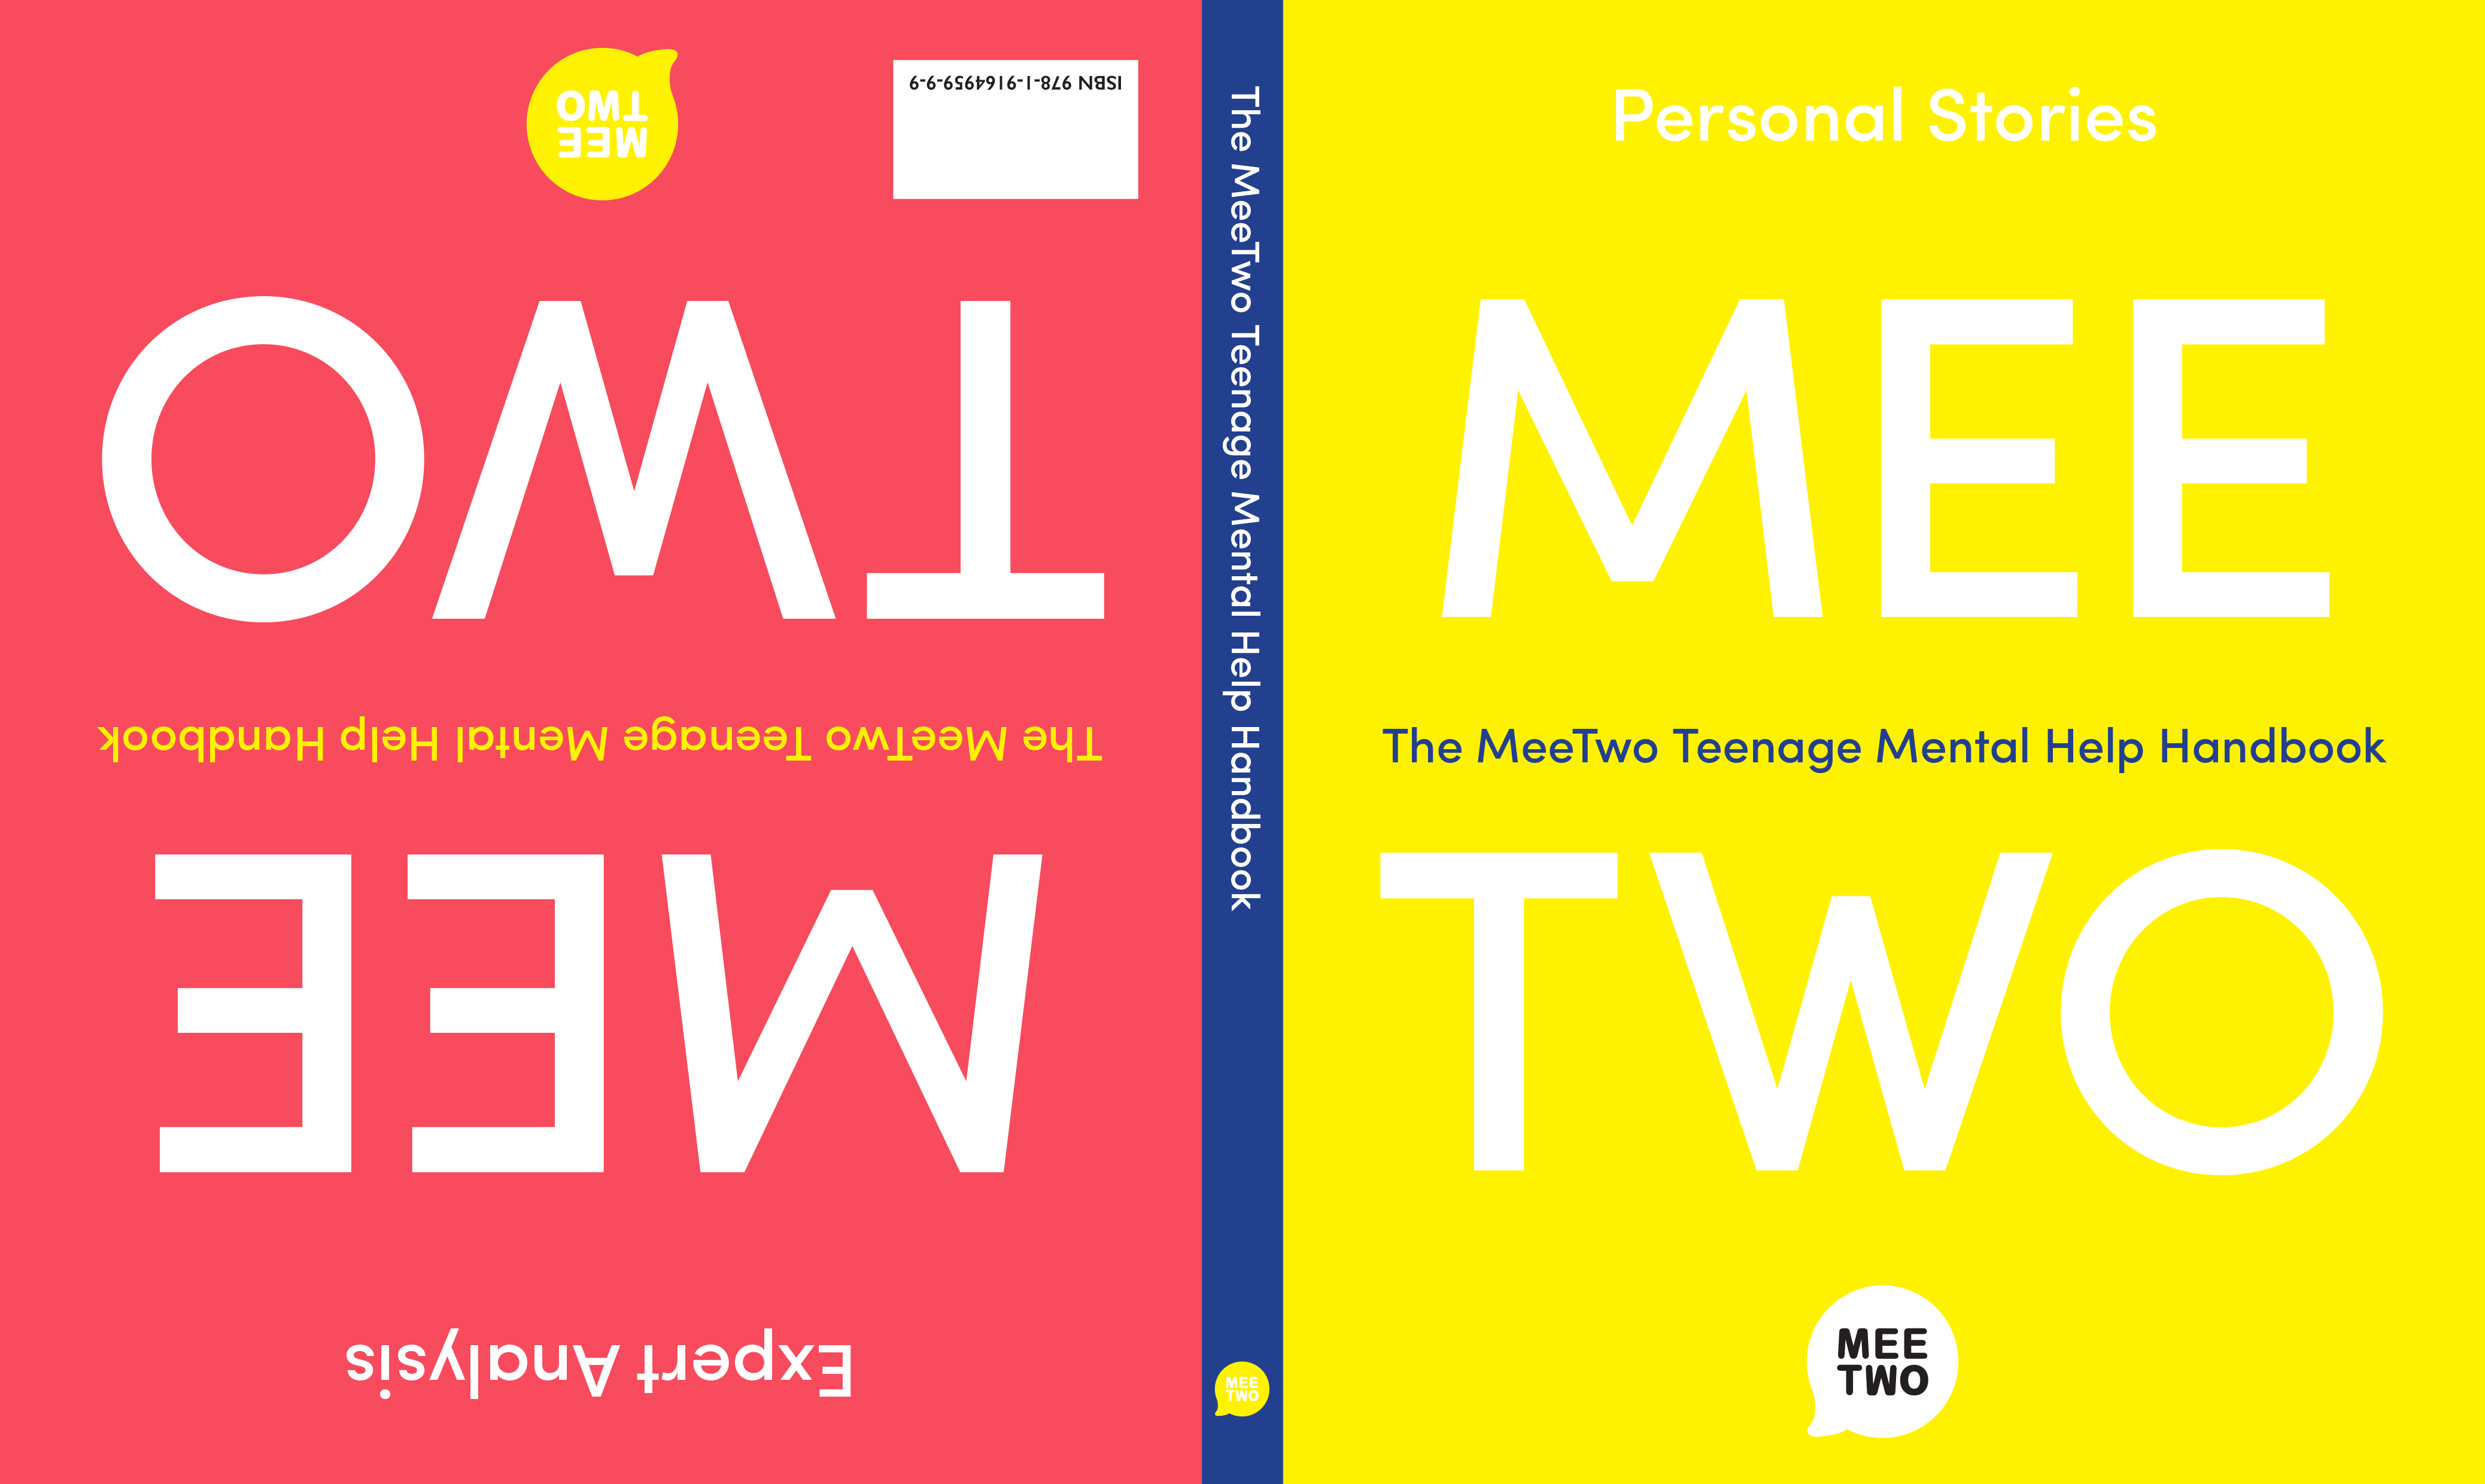 Alternative covers to the MeeTwo handbook